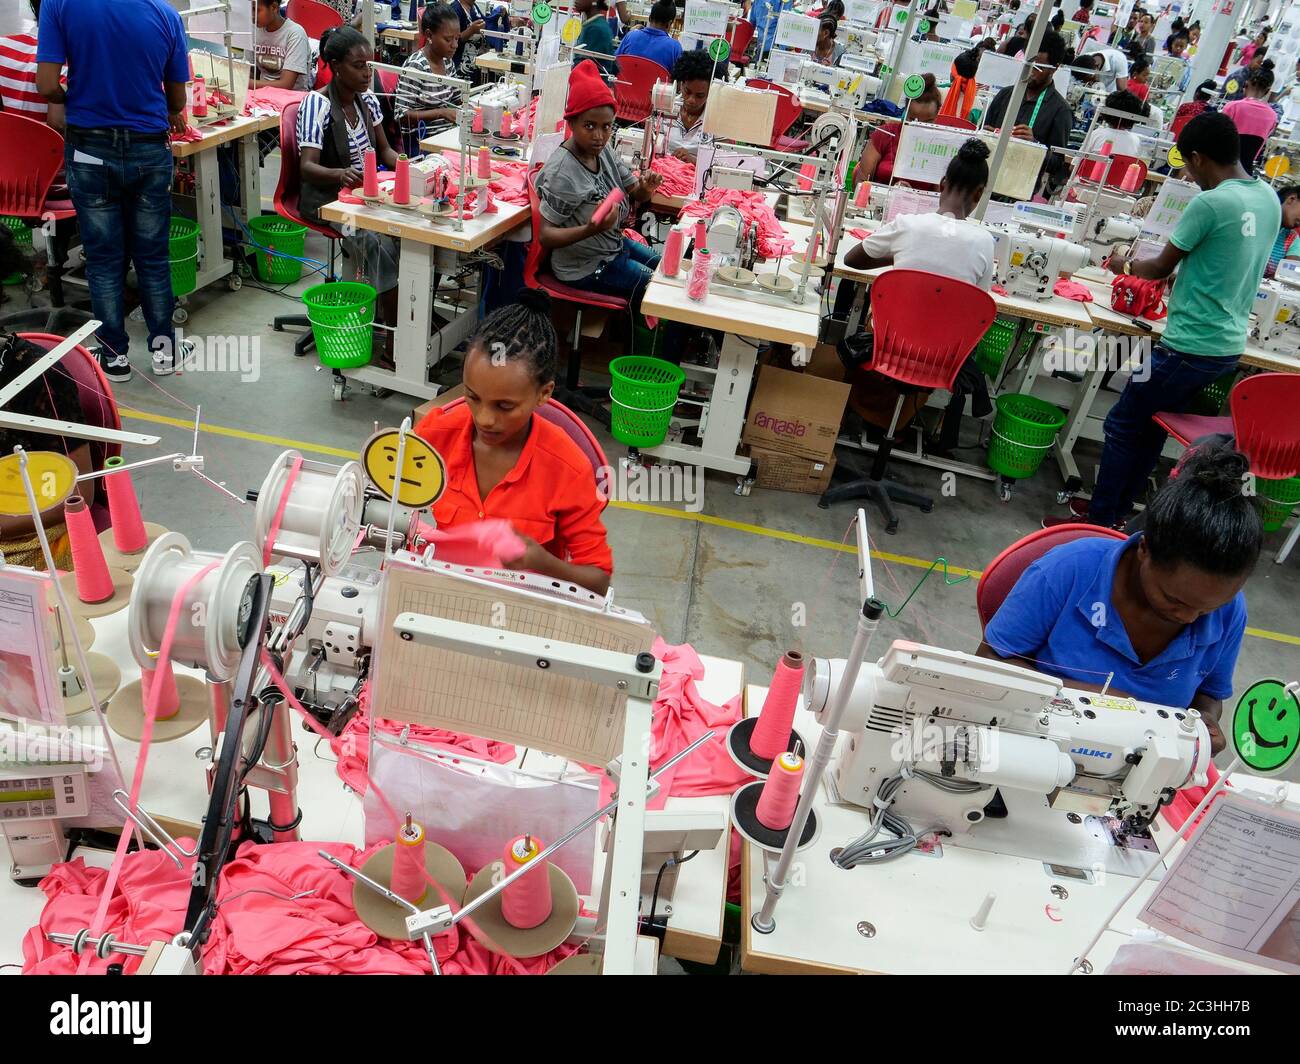 omfattende killing skjold Textile Companies High Resolution Stock Photography and Images - Alamy